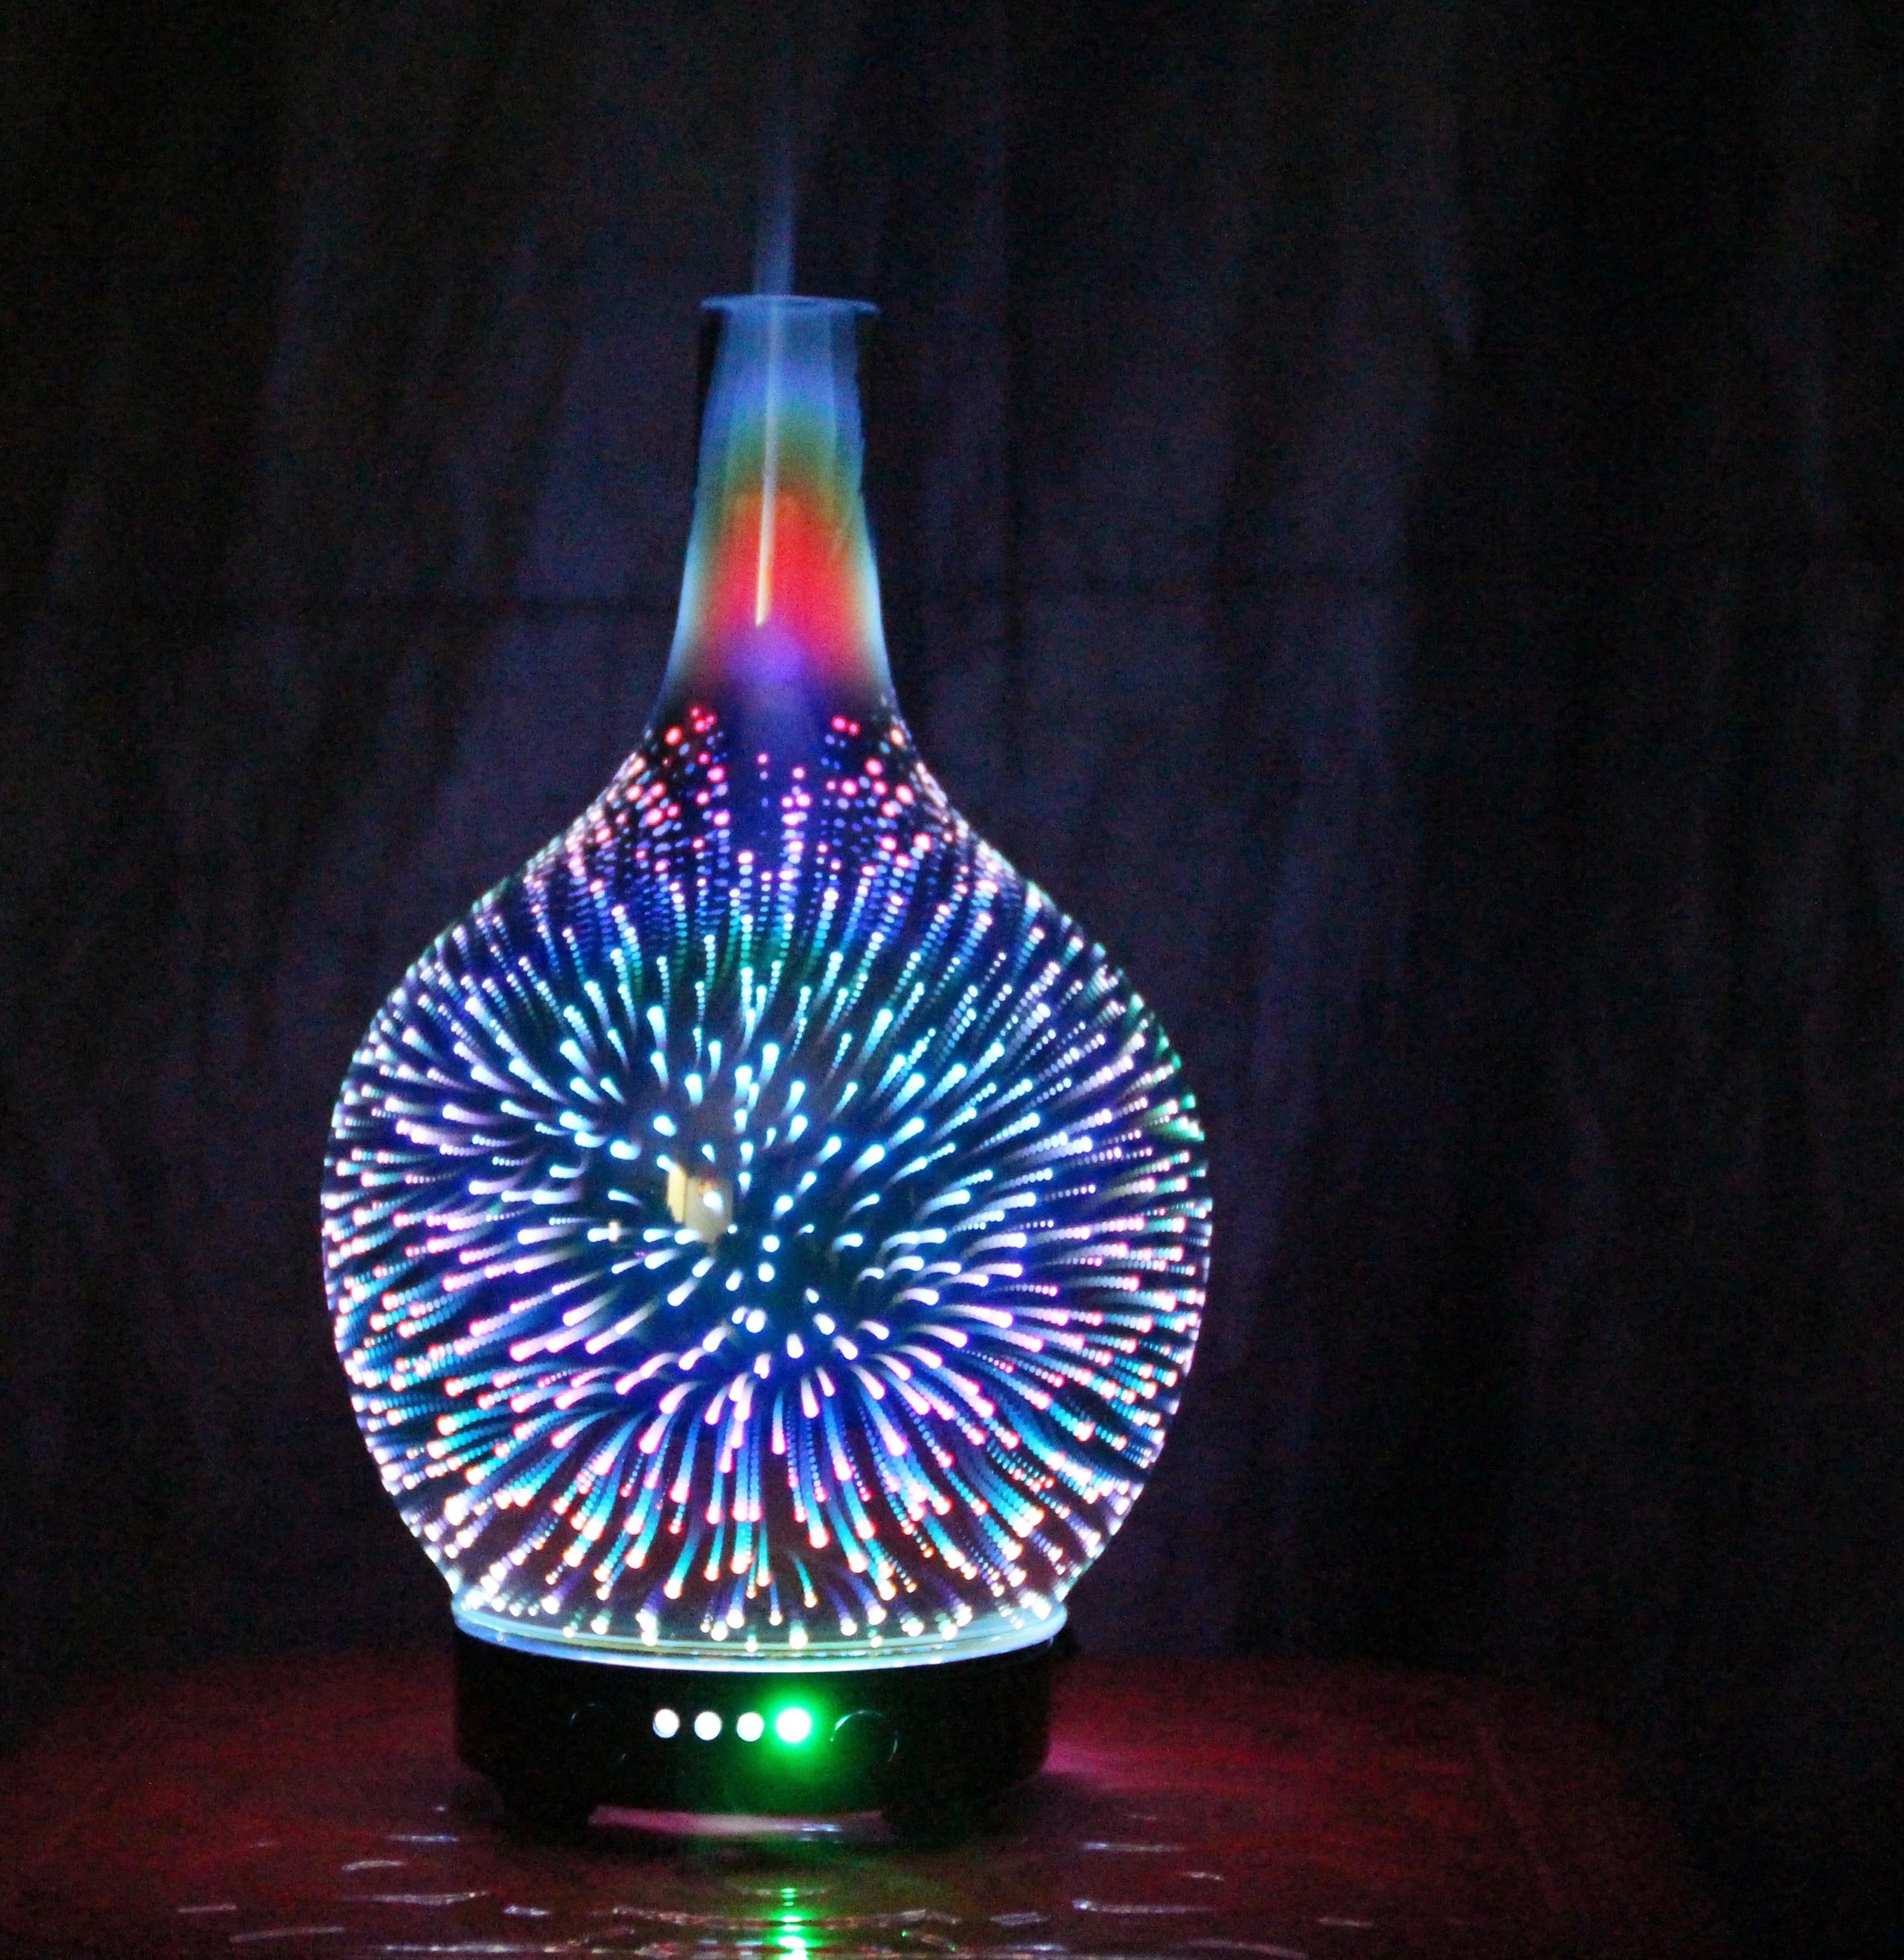 

7 Color Light 3D Glass Vase Aromatherapy Essential Oil Aroma Diffuser Changing and Waterless Auto Shut-off Cool Mist Humidifier